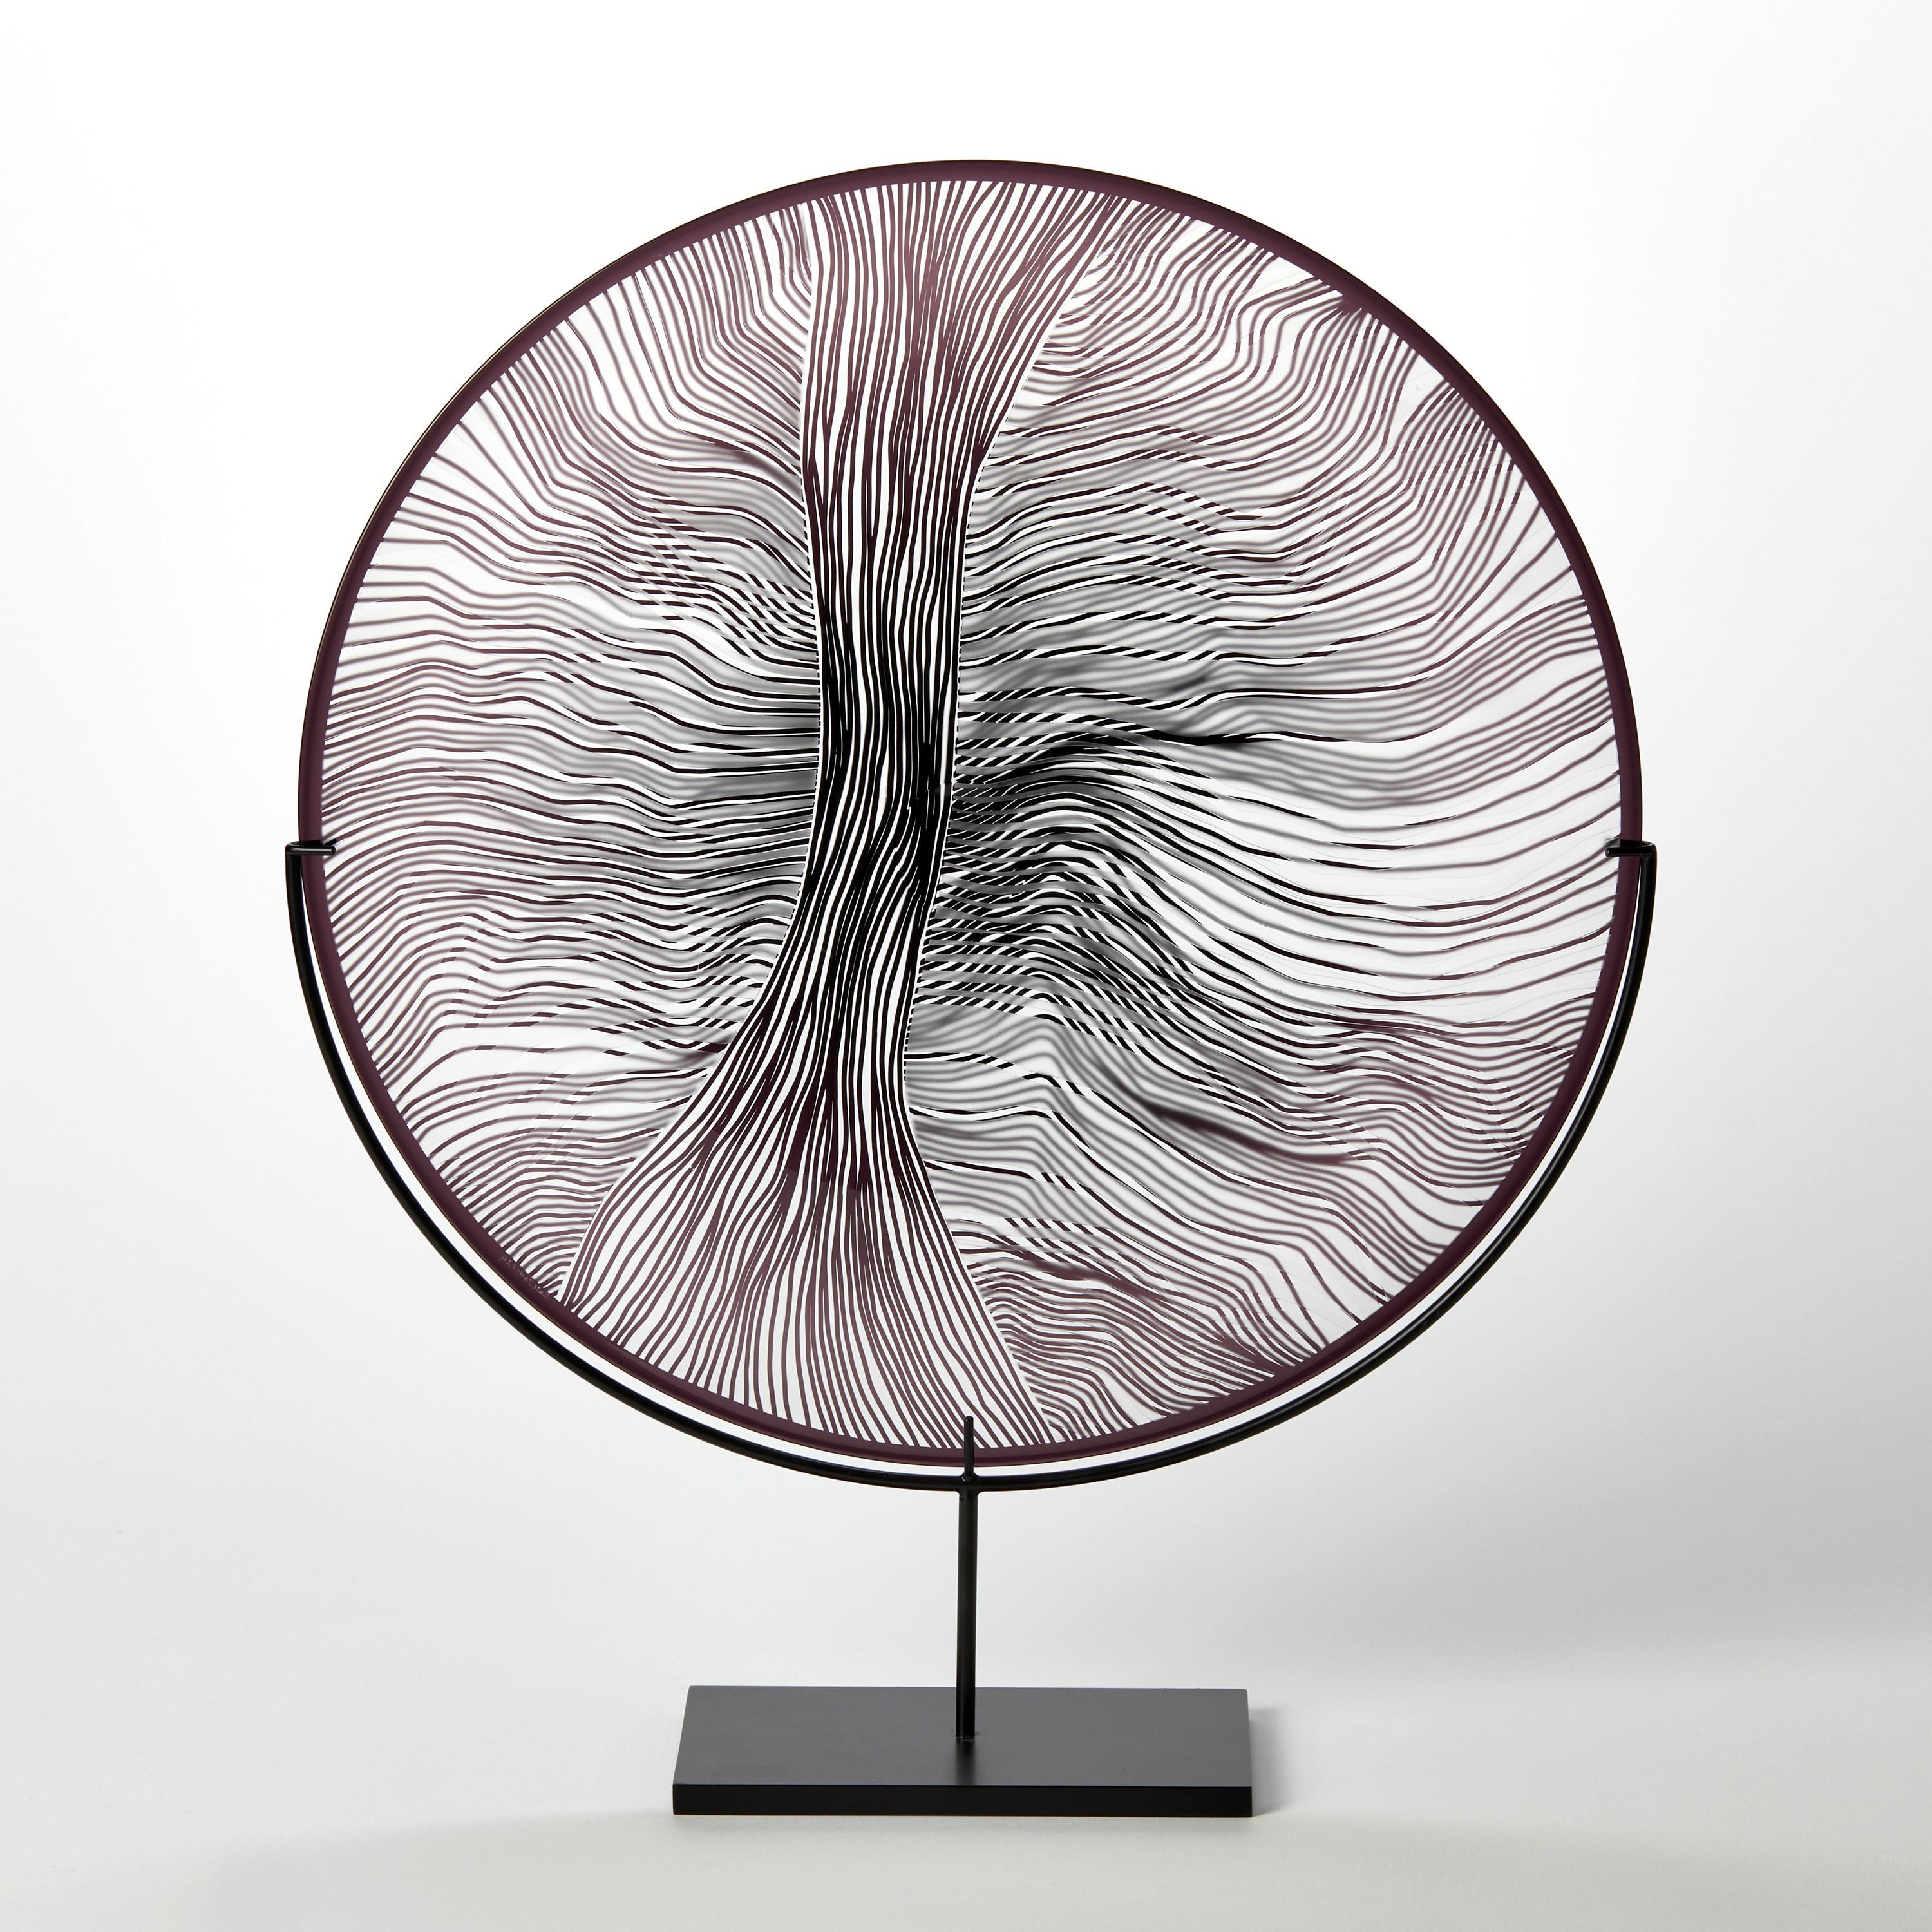 European Solar Storm Monochrome III, abstract cut patterned glass artwork by Kate Jones For Sale